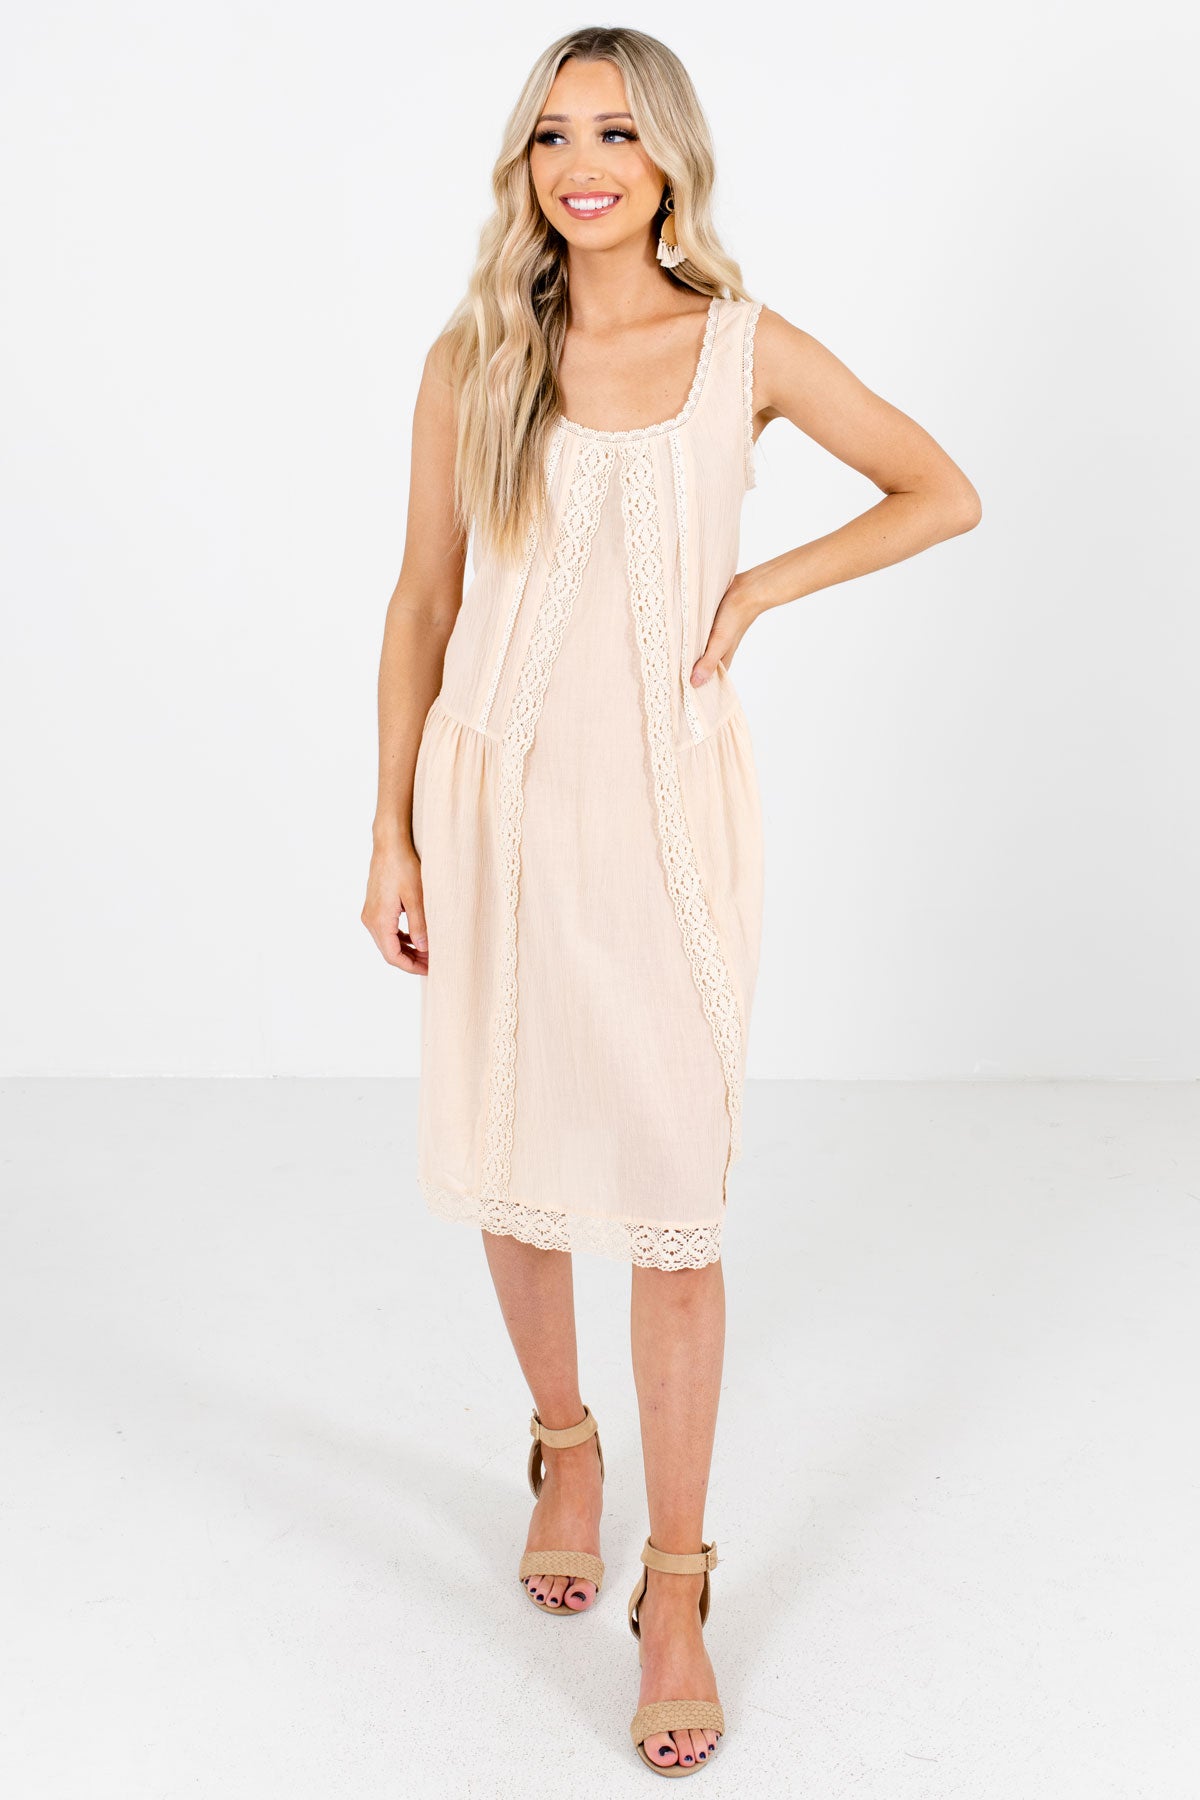 Cream Tank Top Style Boutique Knee-Length Dresses for Women